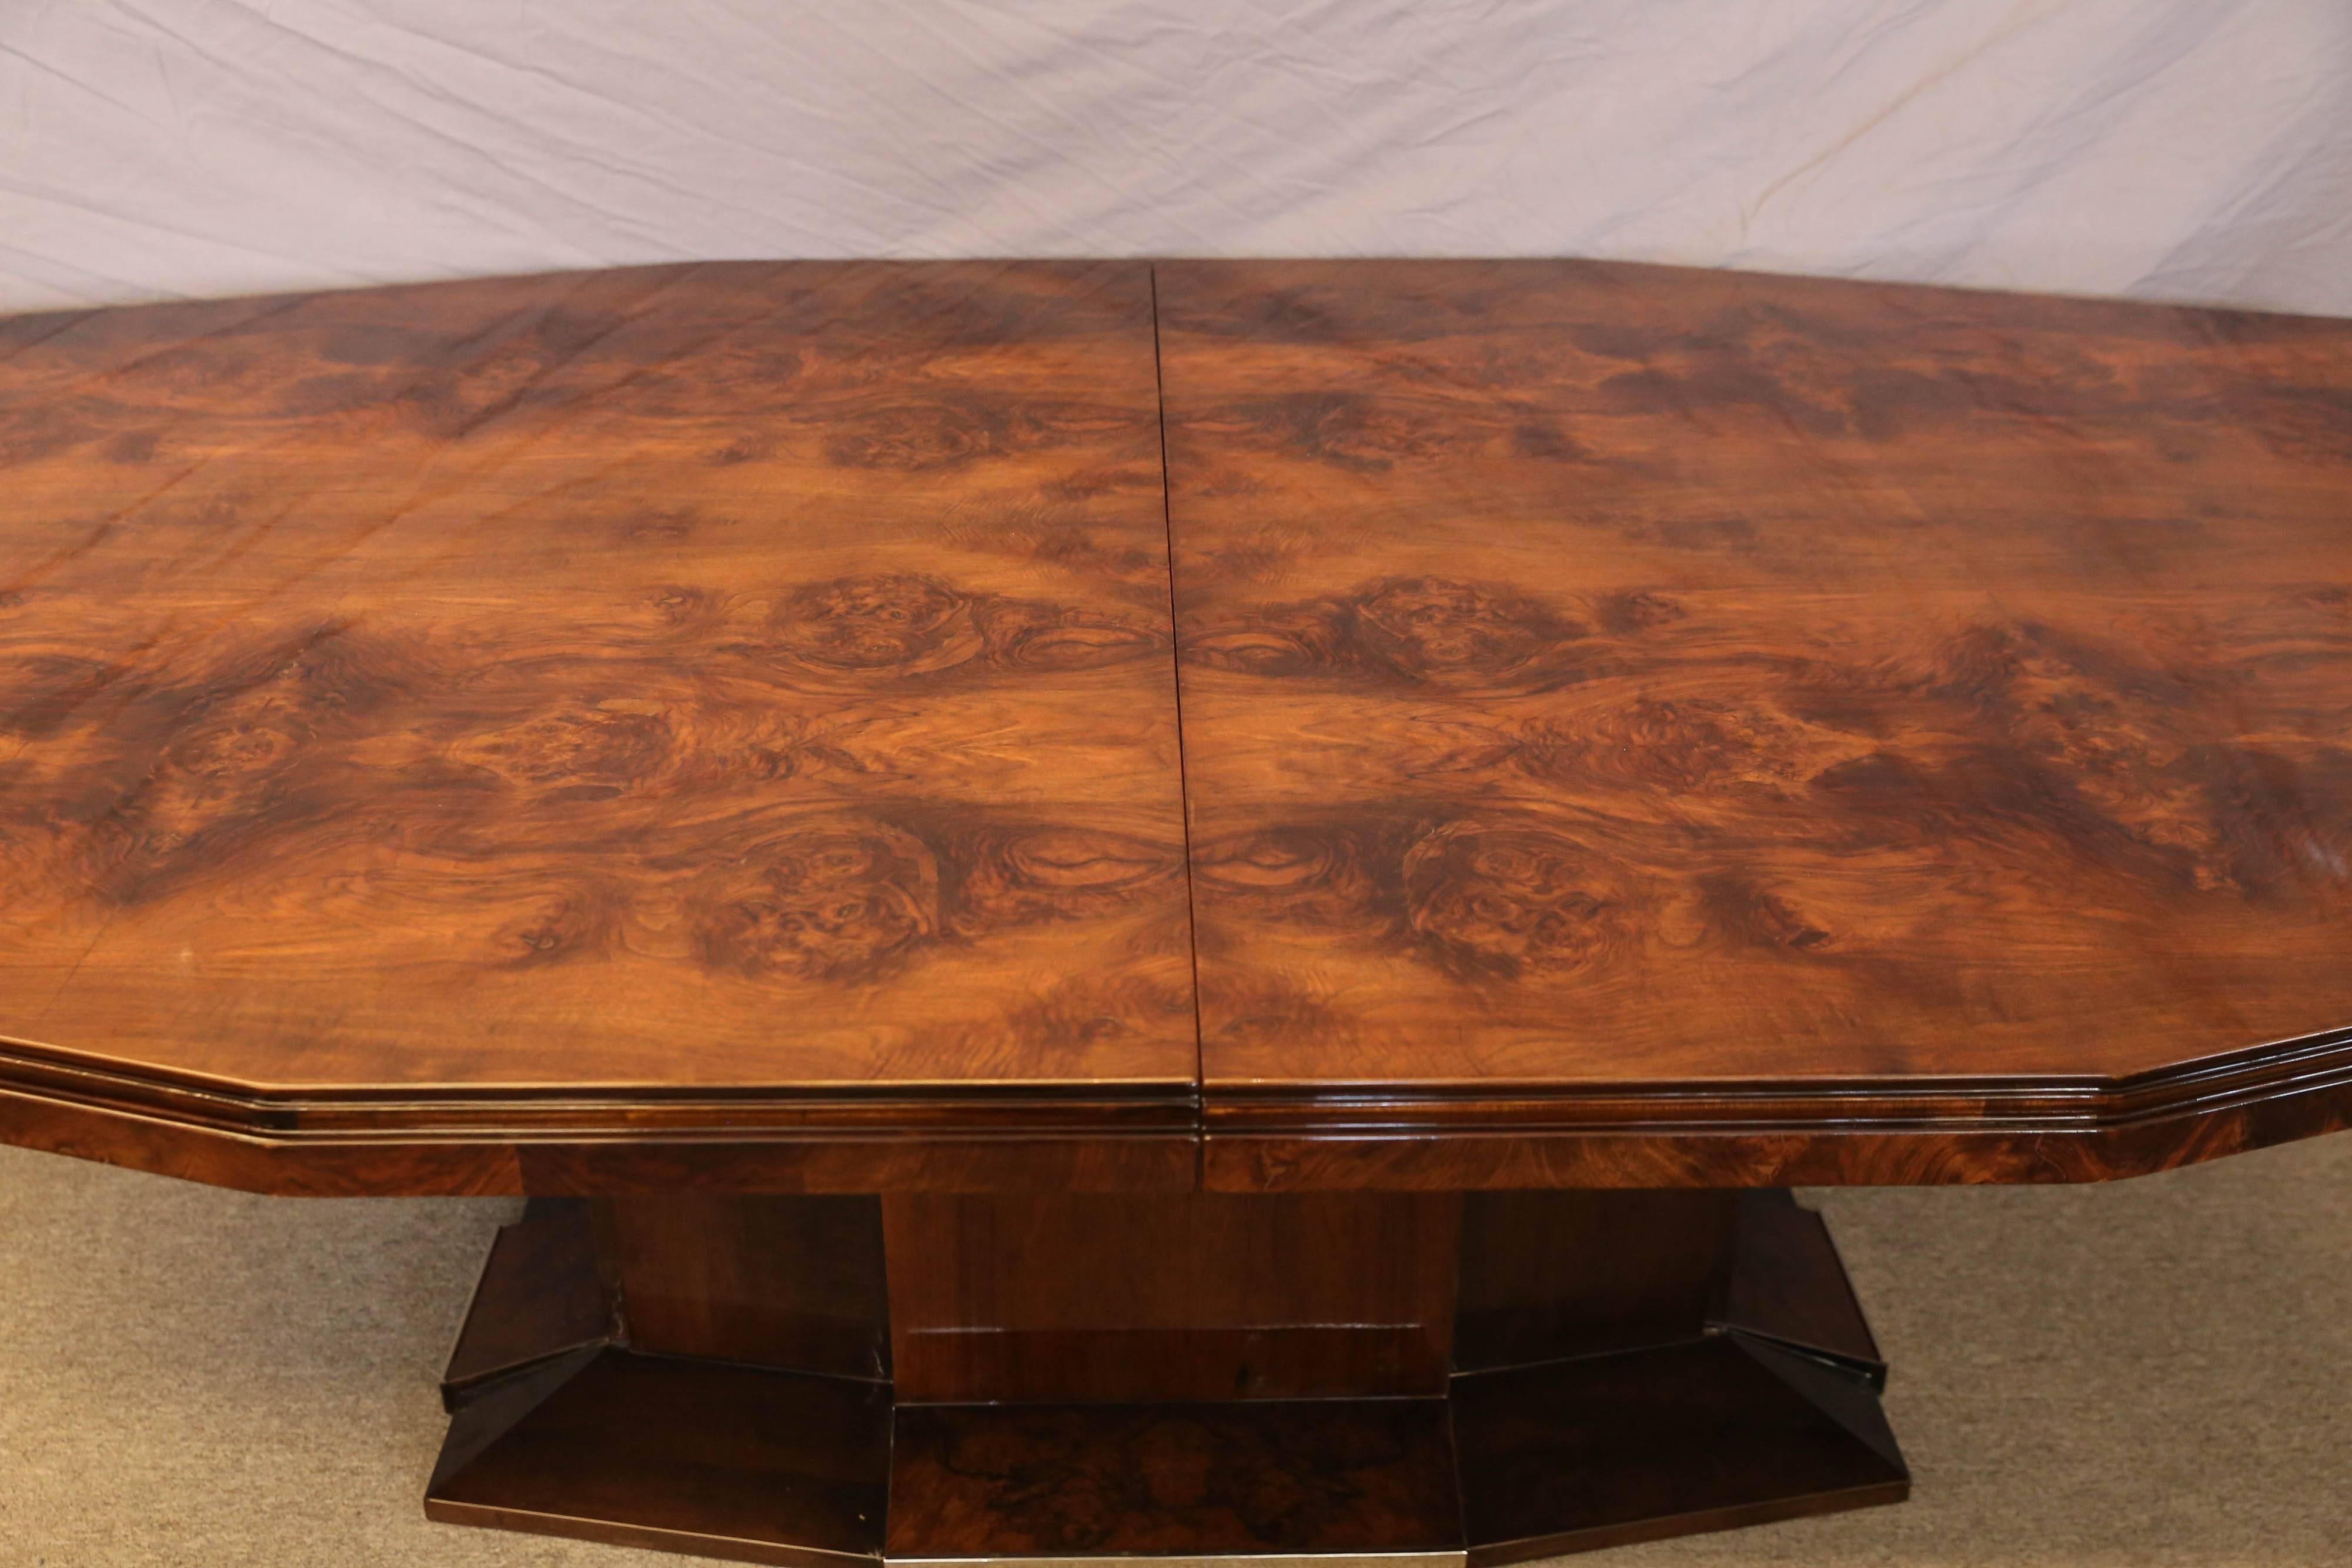 Dining room table is made out of burl walnut. The tabletop is displaying a beauty of the wood. It supported by the wide leg, that is embellished with chrome inserts on the bottom. The table has an extra 20” insert, which could be placed in the